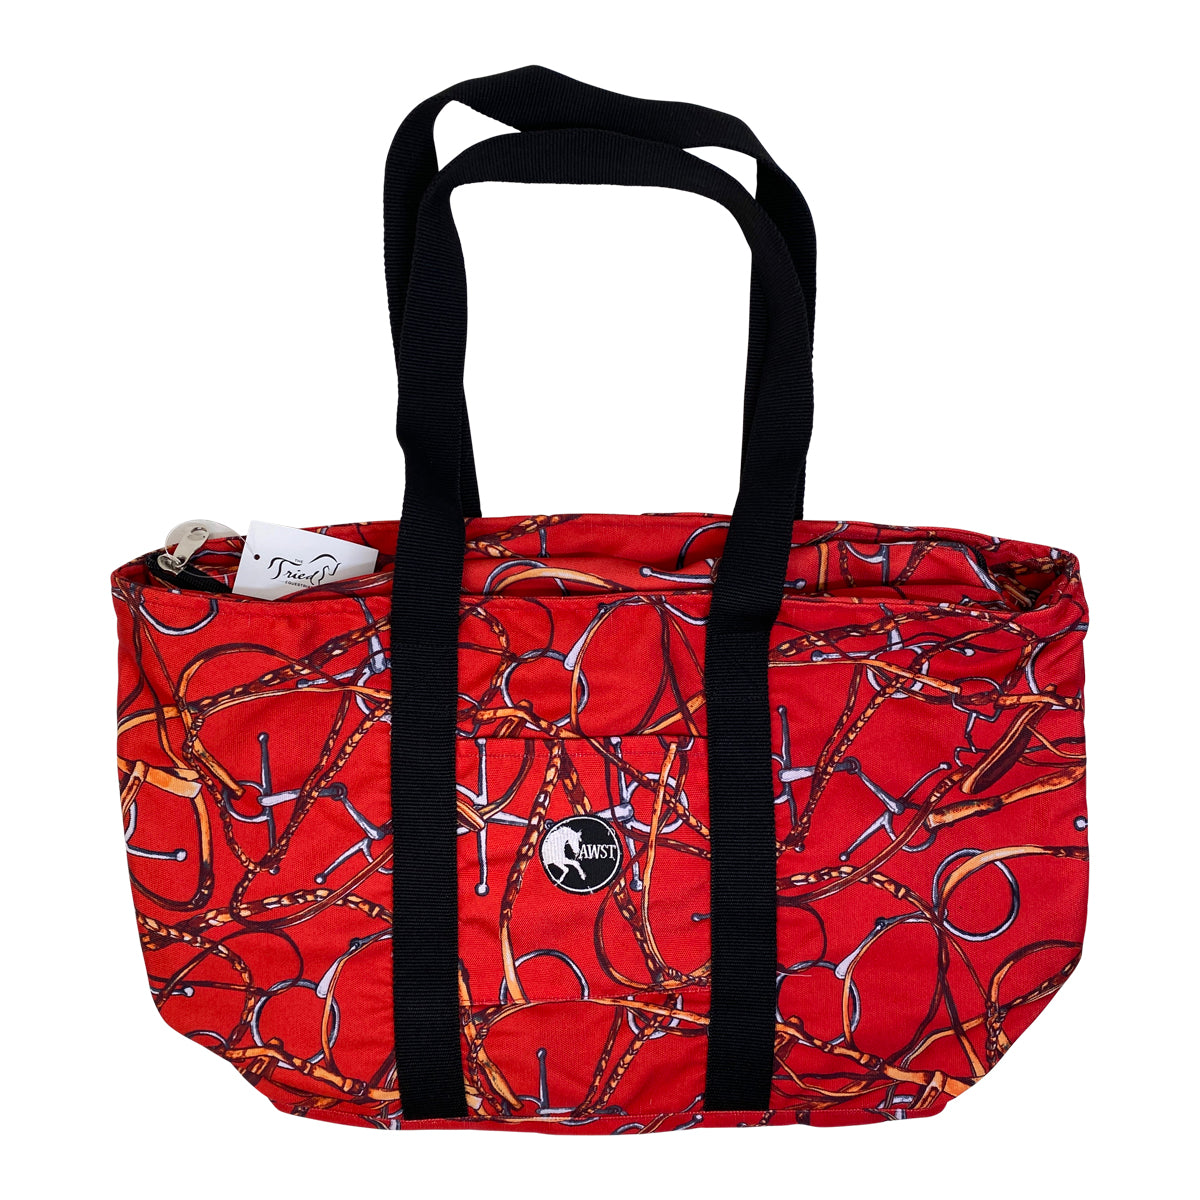 AWST Int'l Lila Snaffle Bit Bridles Tote Bag in Red w/Snaffle Bits and Bridles 